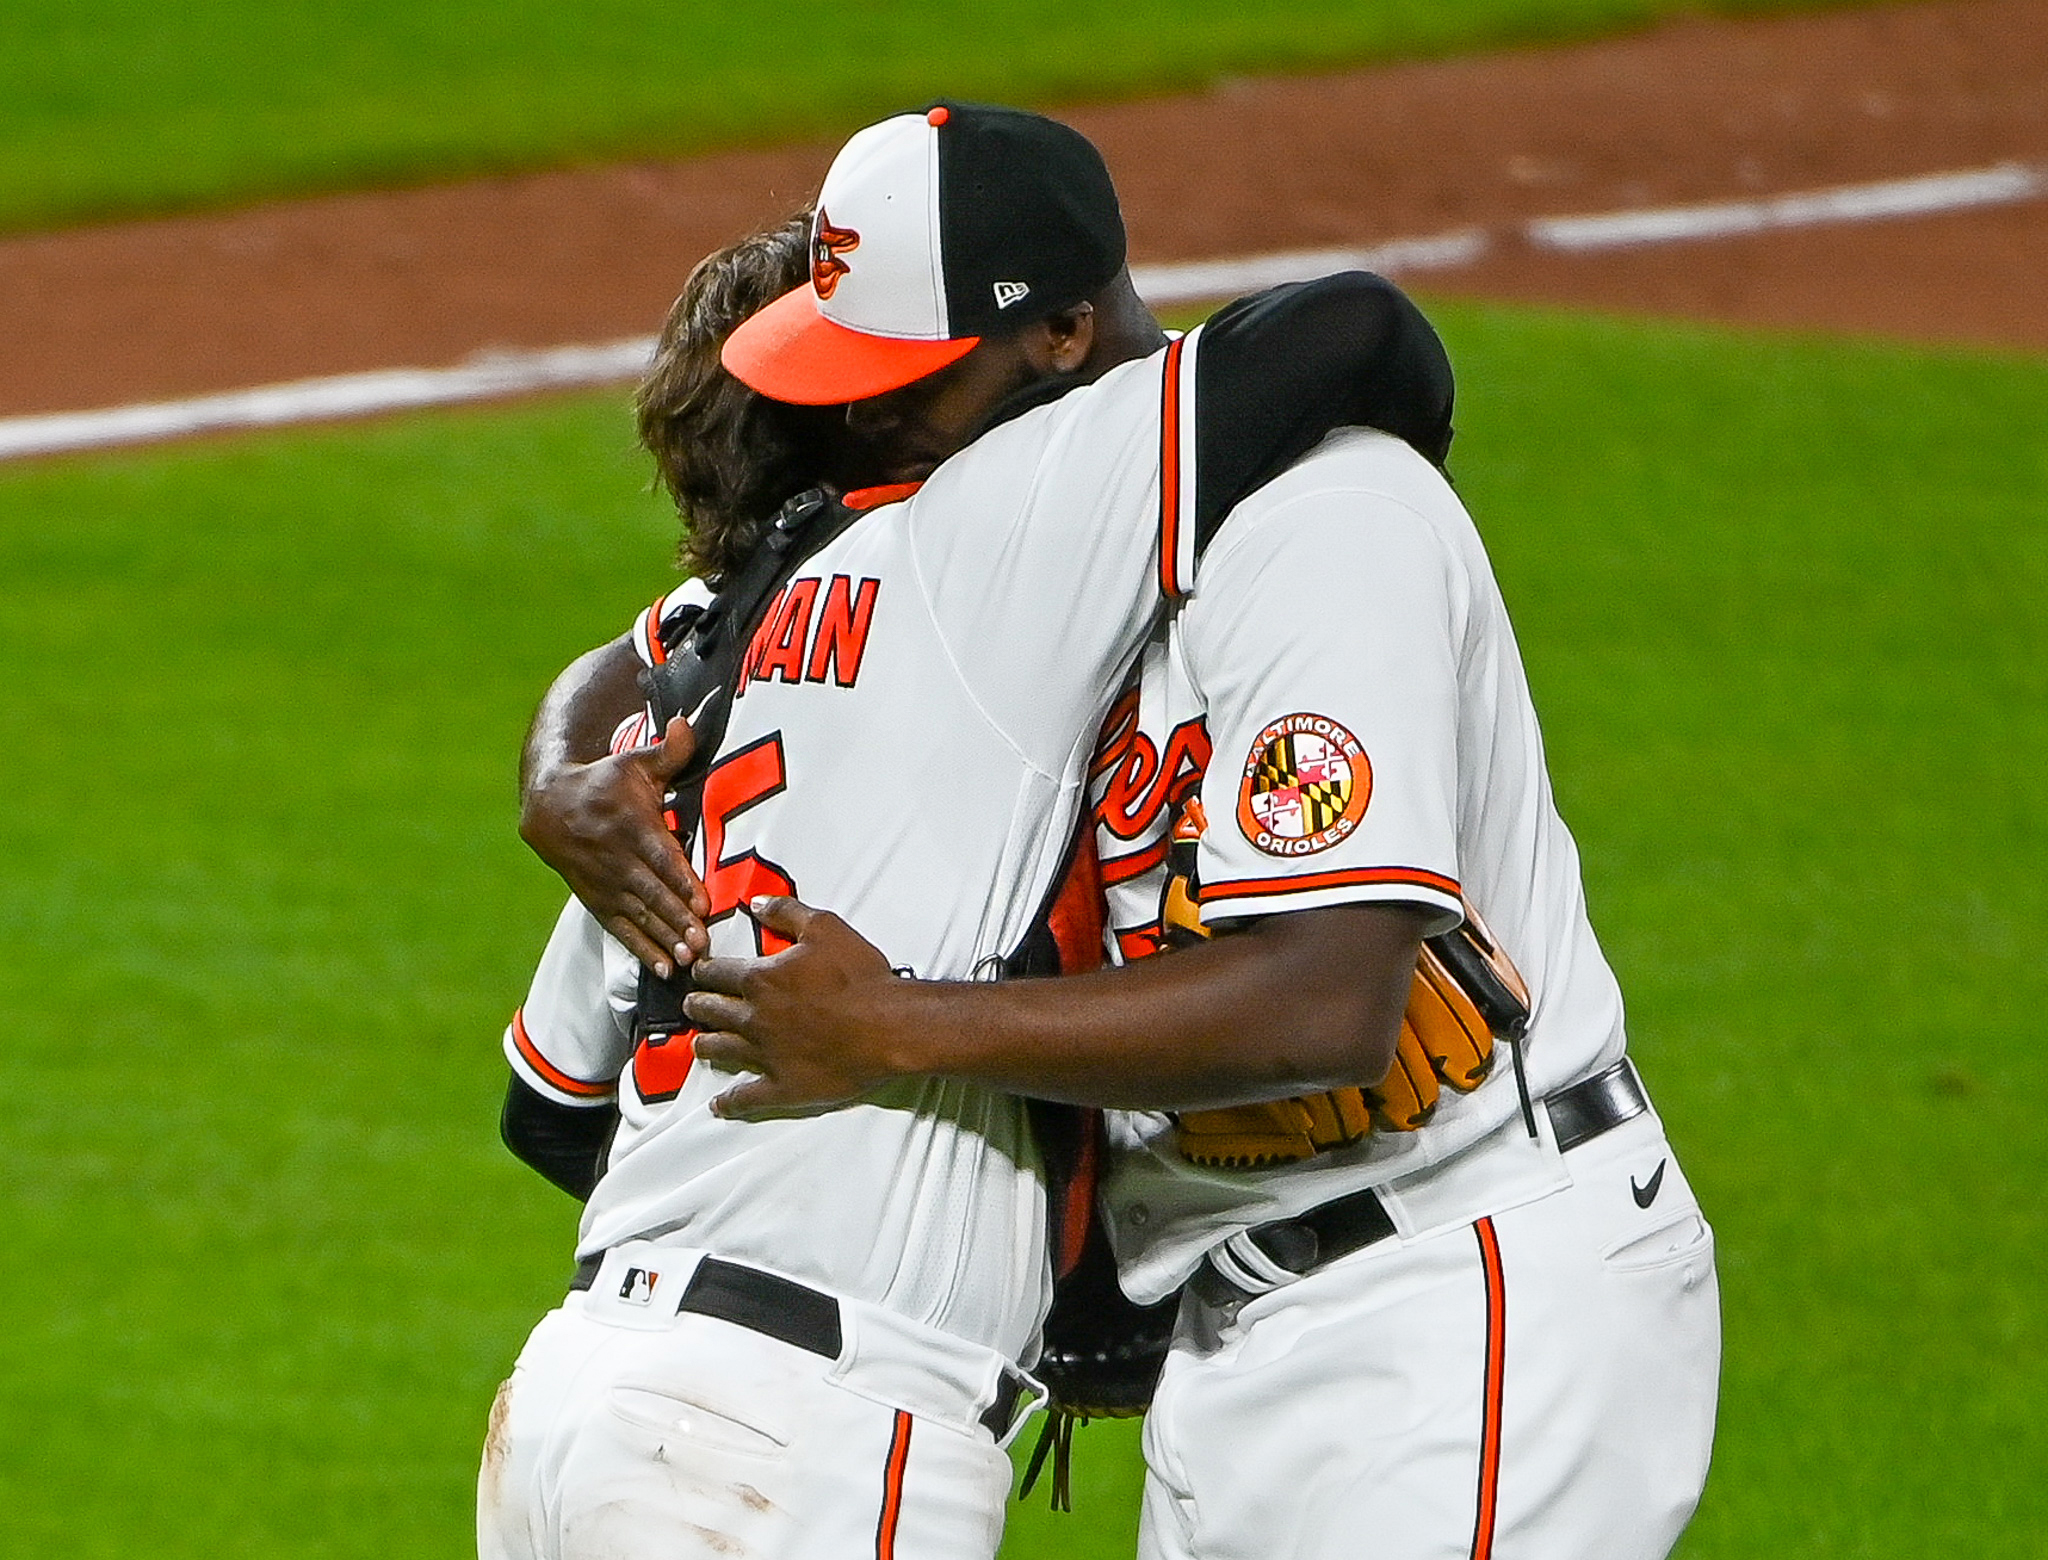 I could just feel the energy coming off him': How 5-foot-8 Cedric Mullins  blazed into Camden Yards - The Athletic